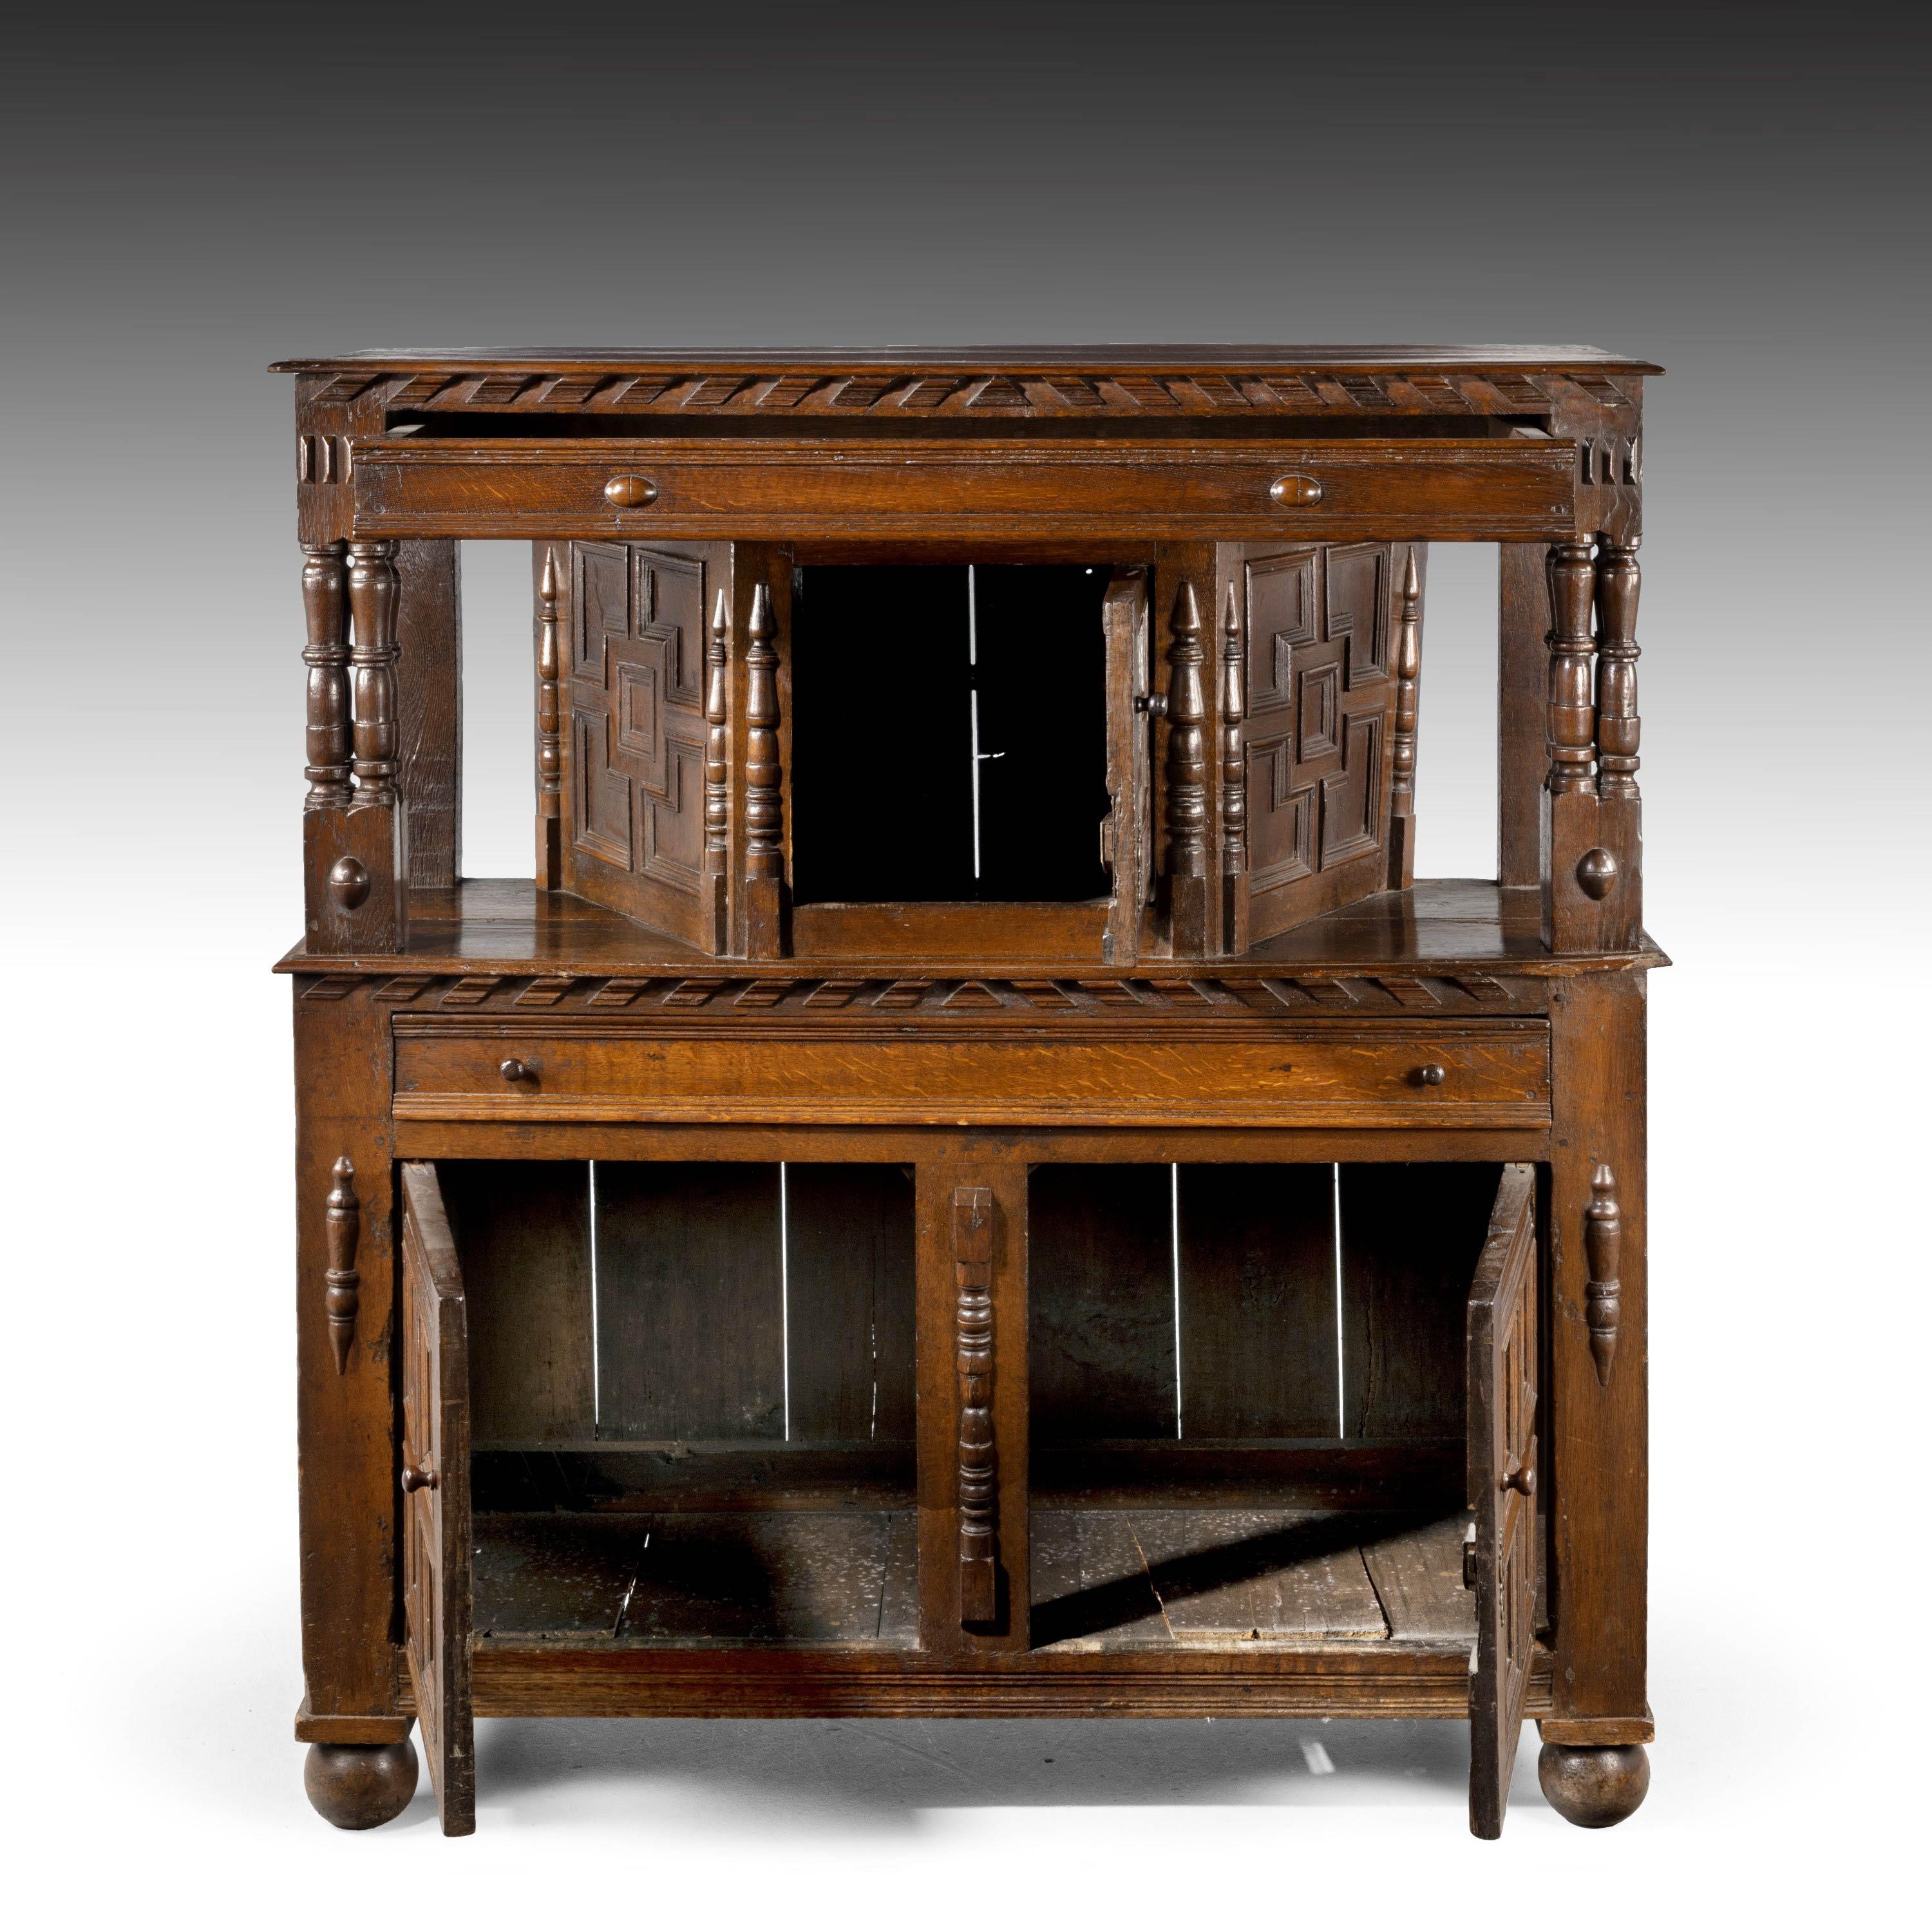 A good late 17th century oak court cupboard. A two part top with a molded edge above a long drawer. Fielded panels to the centrical with matching side panels. Unusual clustered columns to the left and ride hand side. Excellent overall colour and